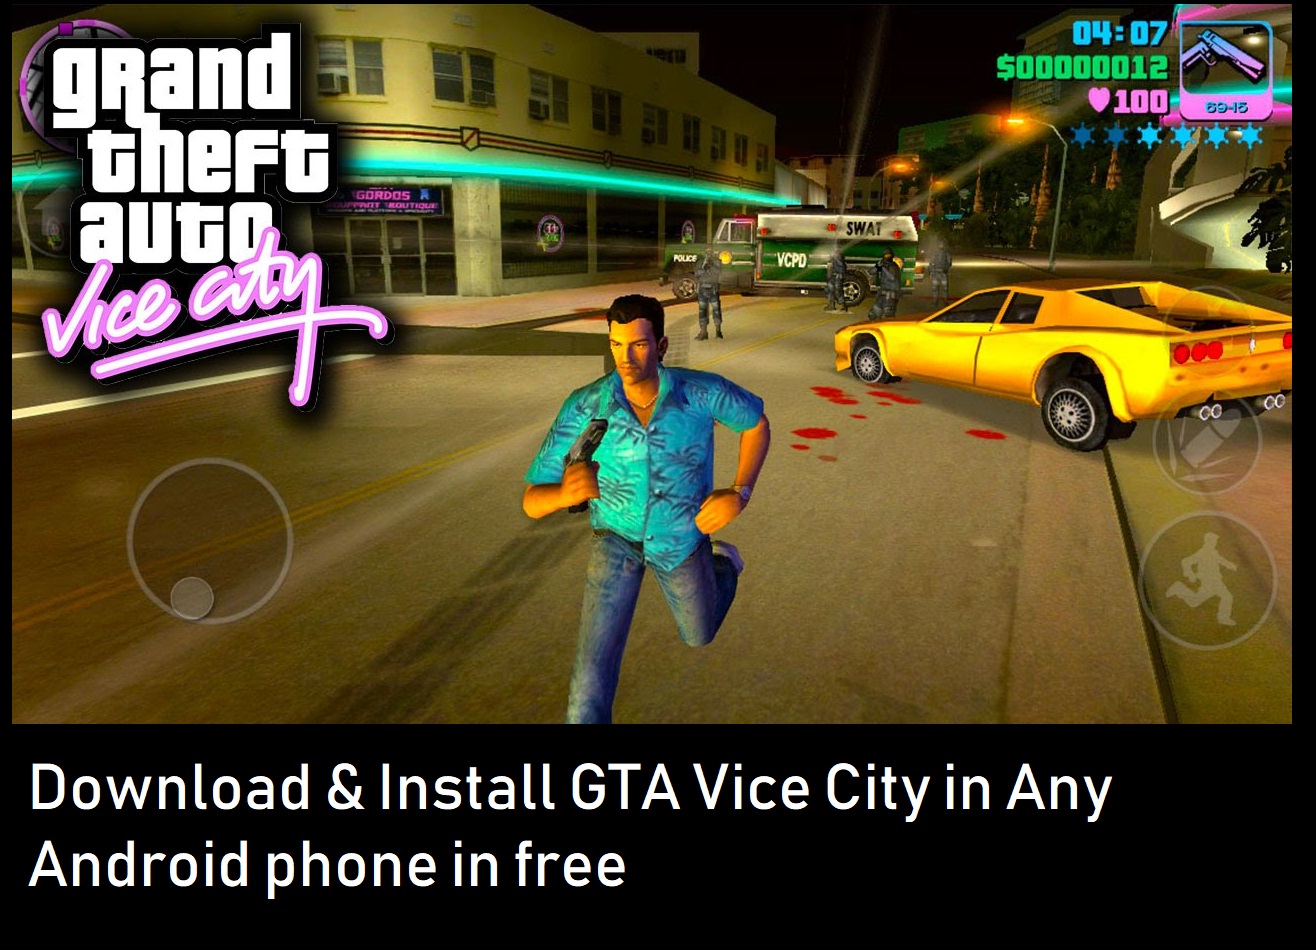 Gta Vice City 2 Game Free Download For Android Mobile